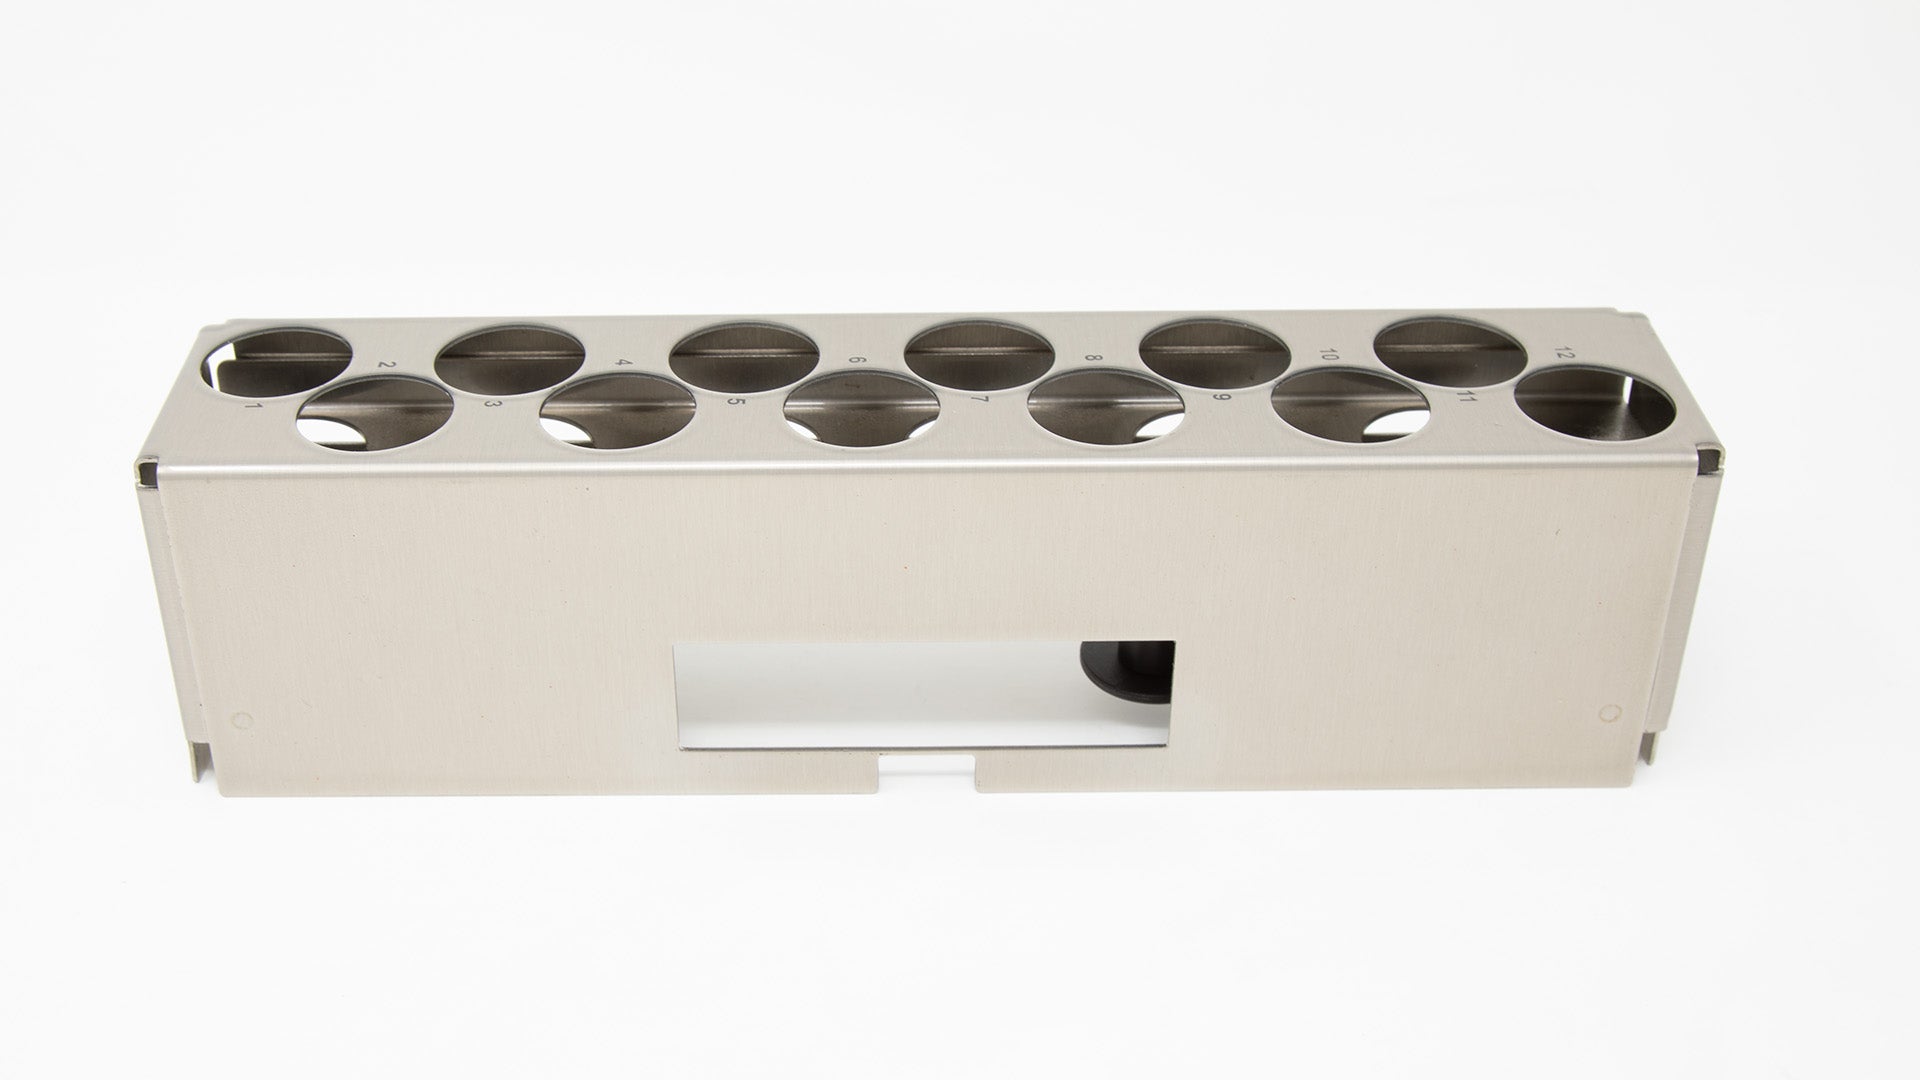 Stainless steel rack with holes to hold vials